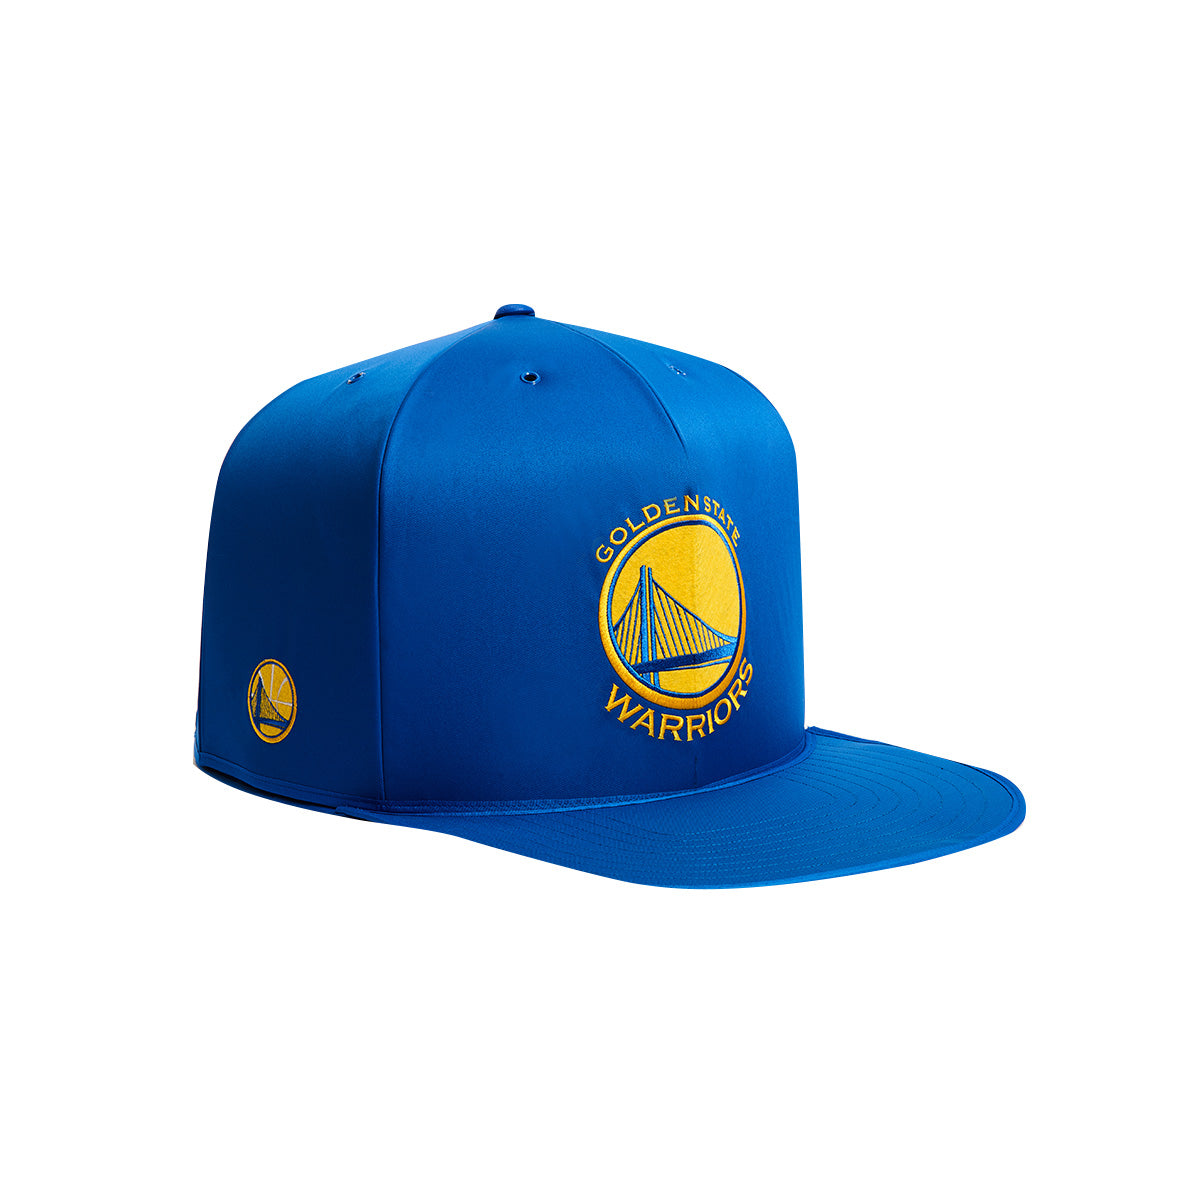 NEW ERA: BAGS AND ACCESSORIES, NEW ERA GOLDEN STATE WARRIORS